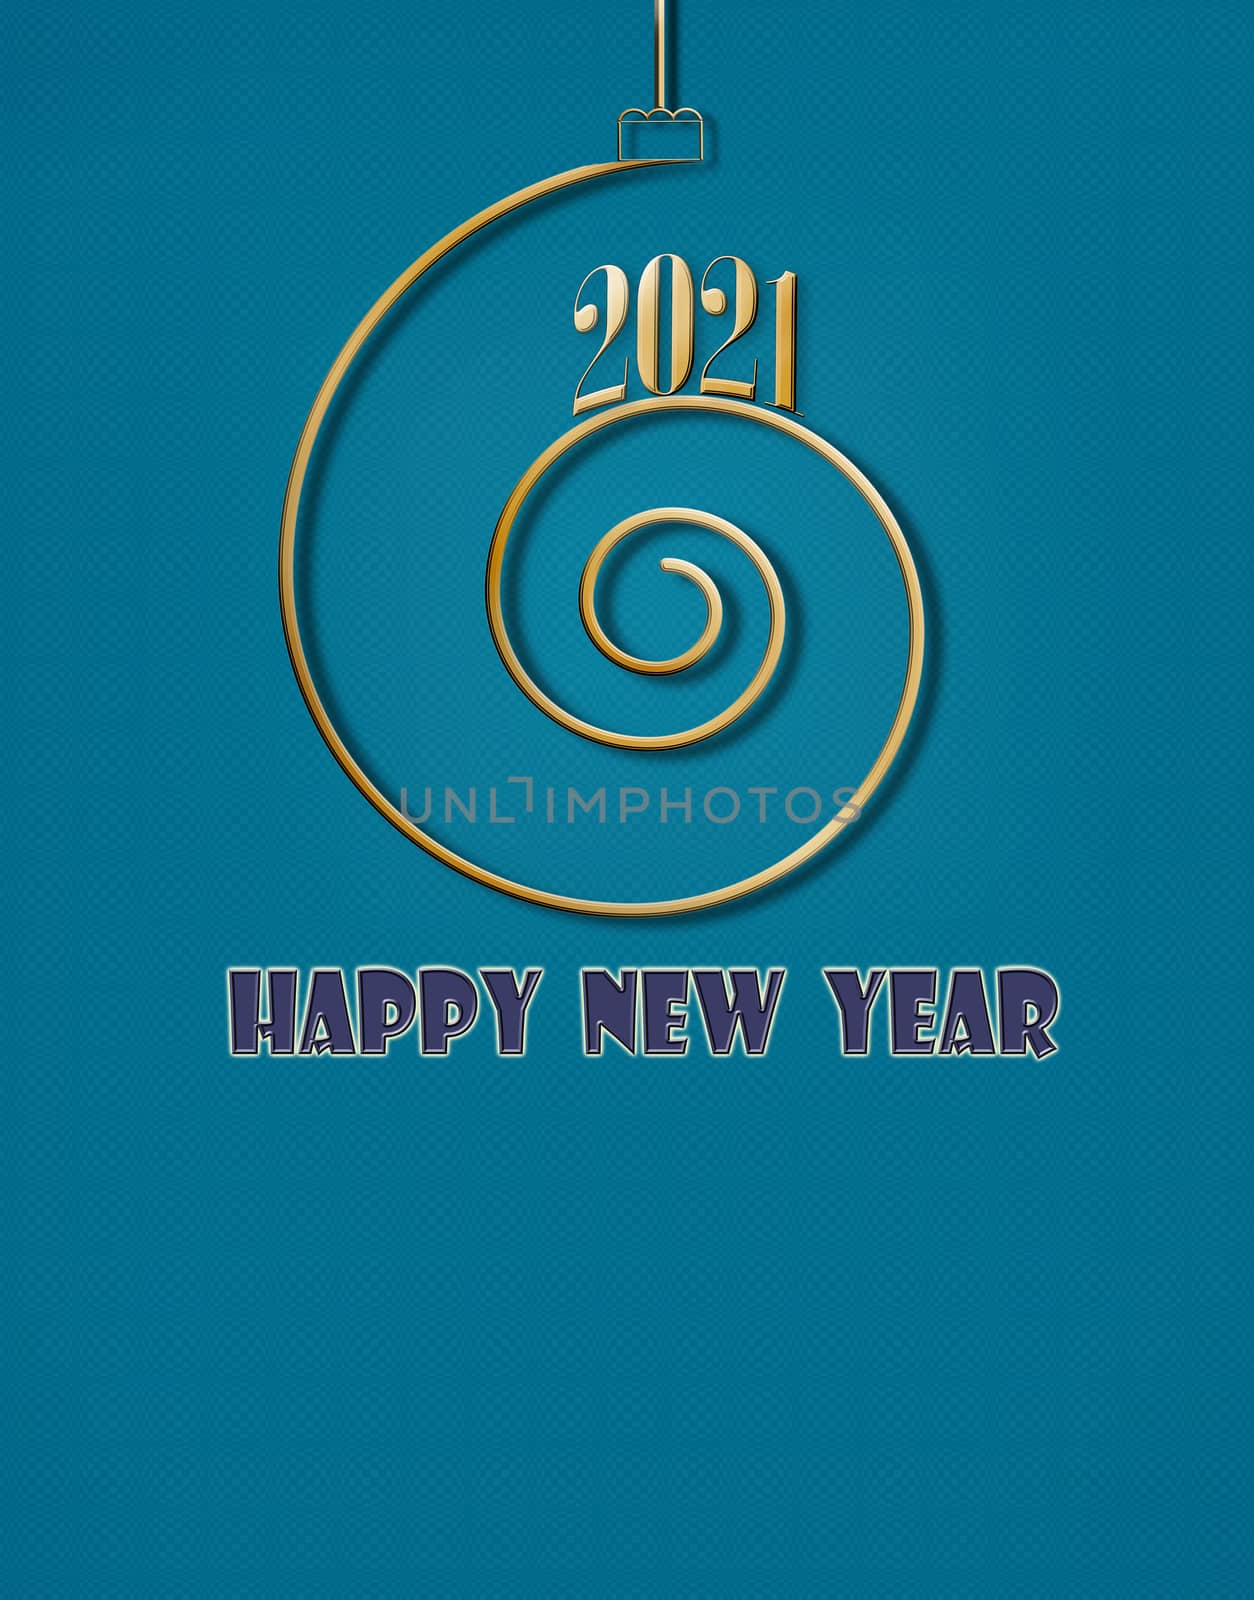 2021 Merry Christmas happy new year gold spiral shape on turquoise background by NelliPolk